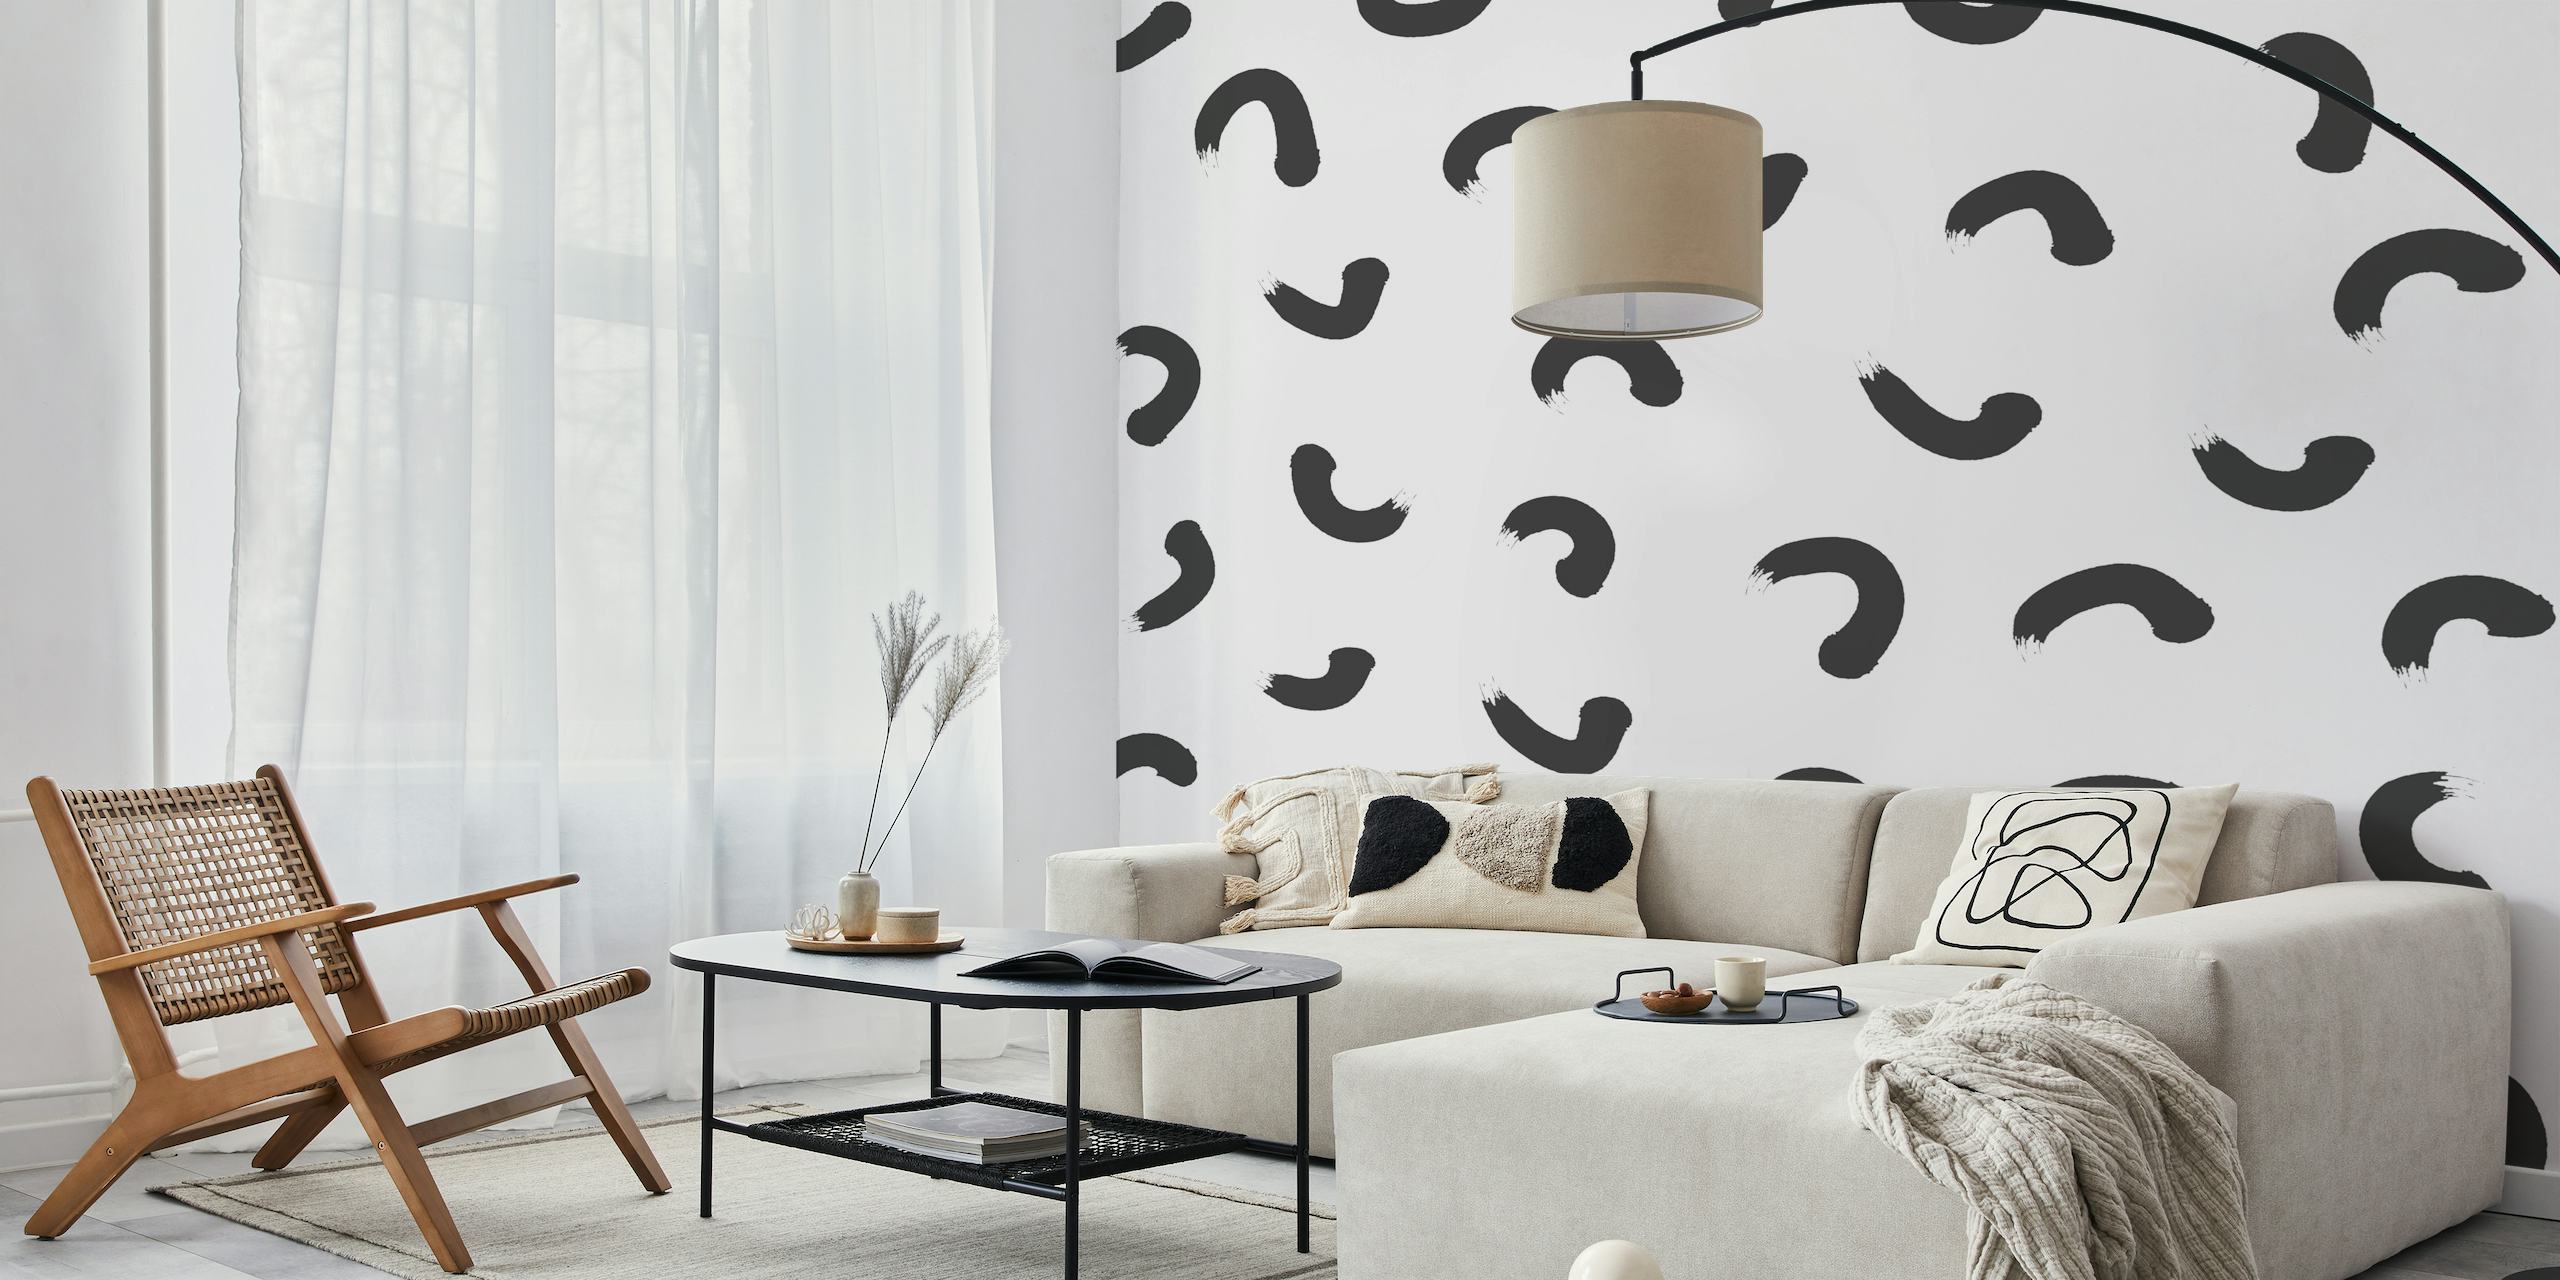 Black and white doodle swirl pattern wall mural from happywall.com